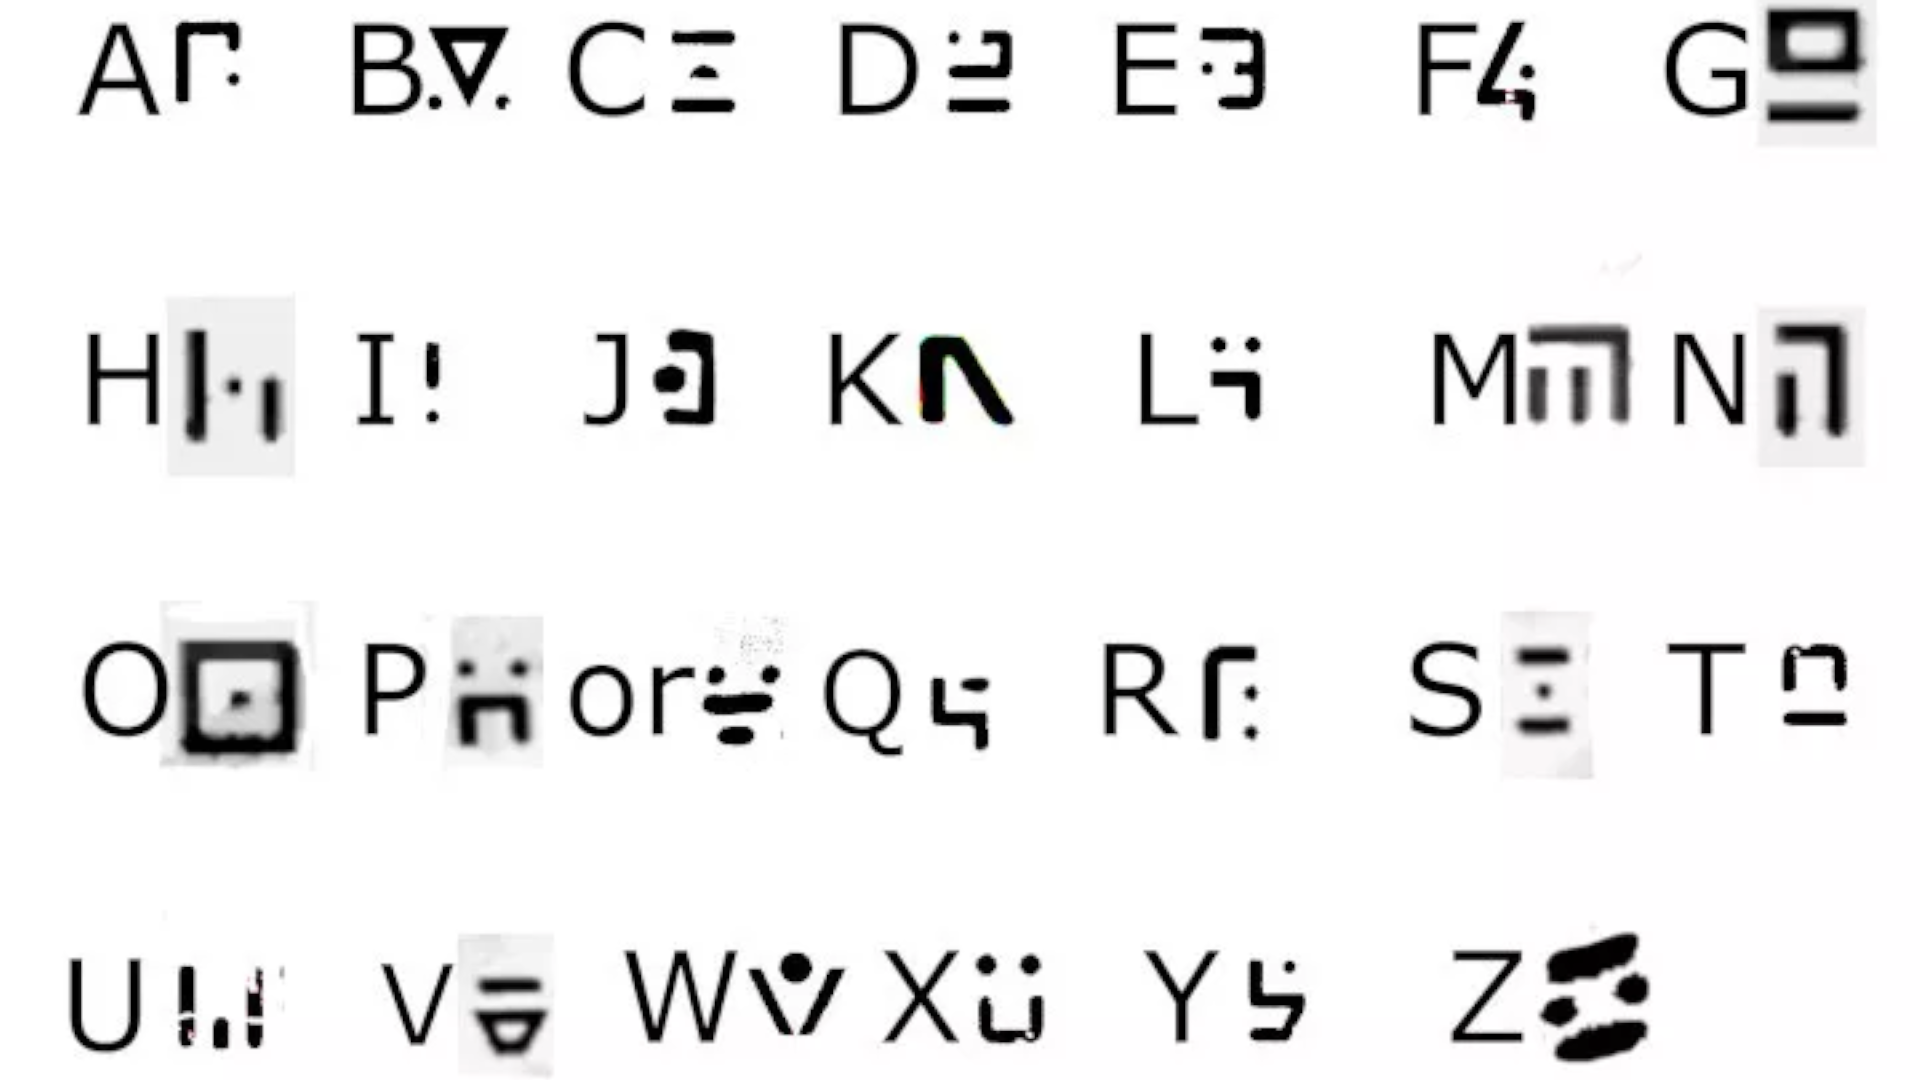 Cipher used in Stray laid out with the English alphabet